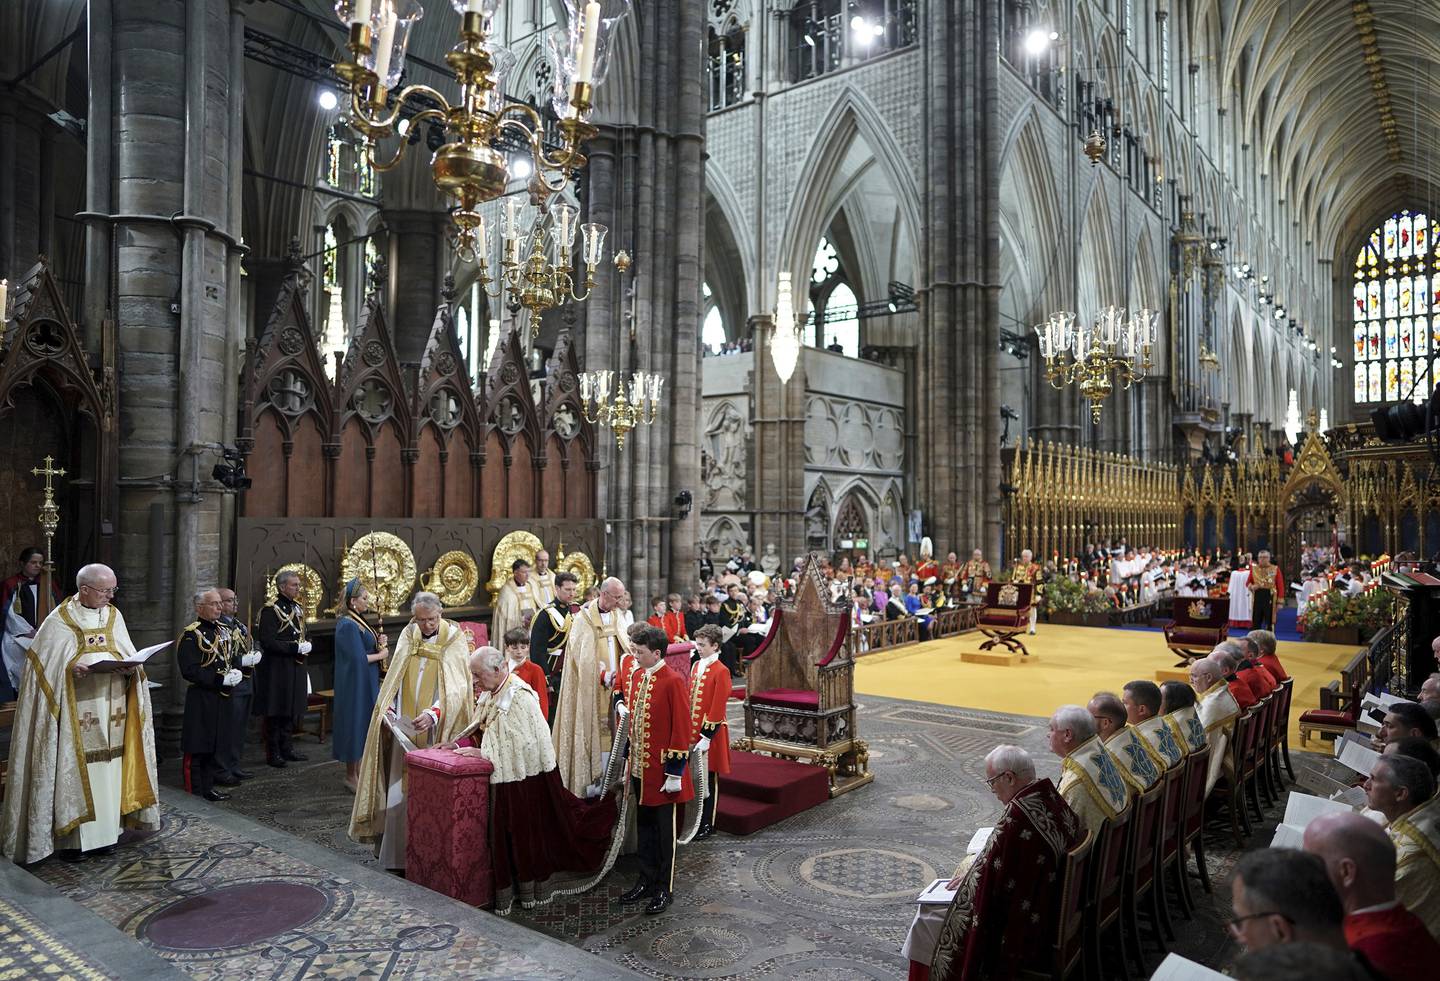 King Charles III kneels during the coronation ceremony at Westminster Abbey, London.